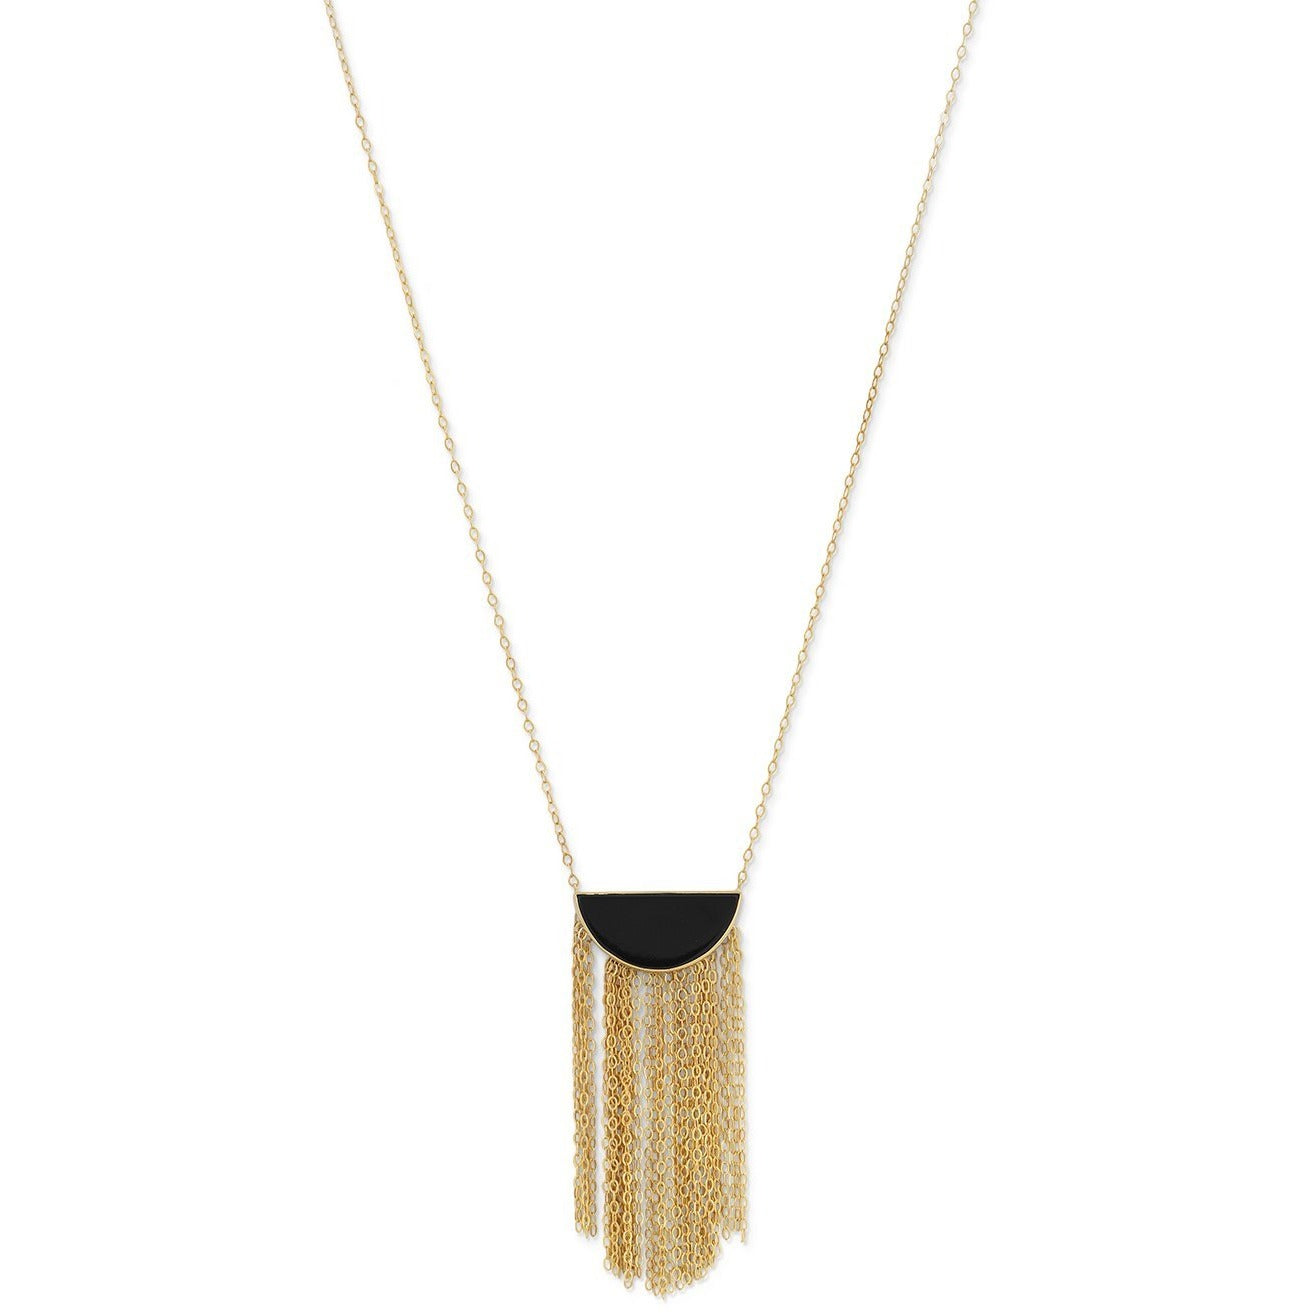 Gold Plated Silver Black Onyx and Fringe Necklace